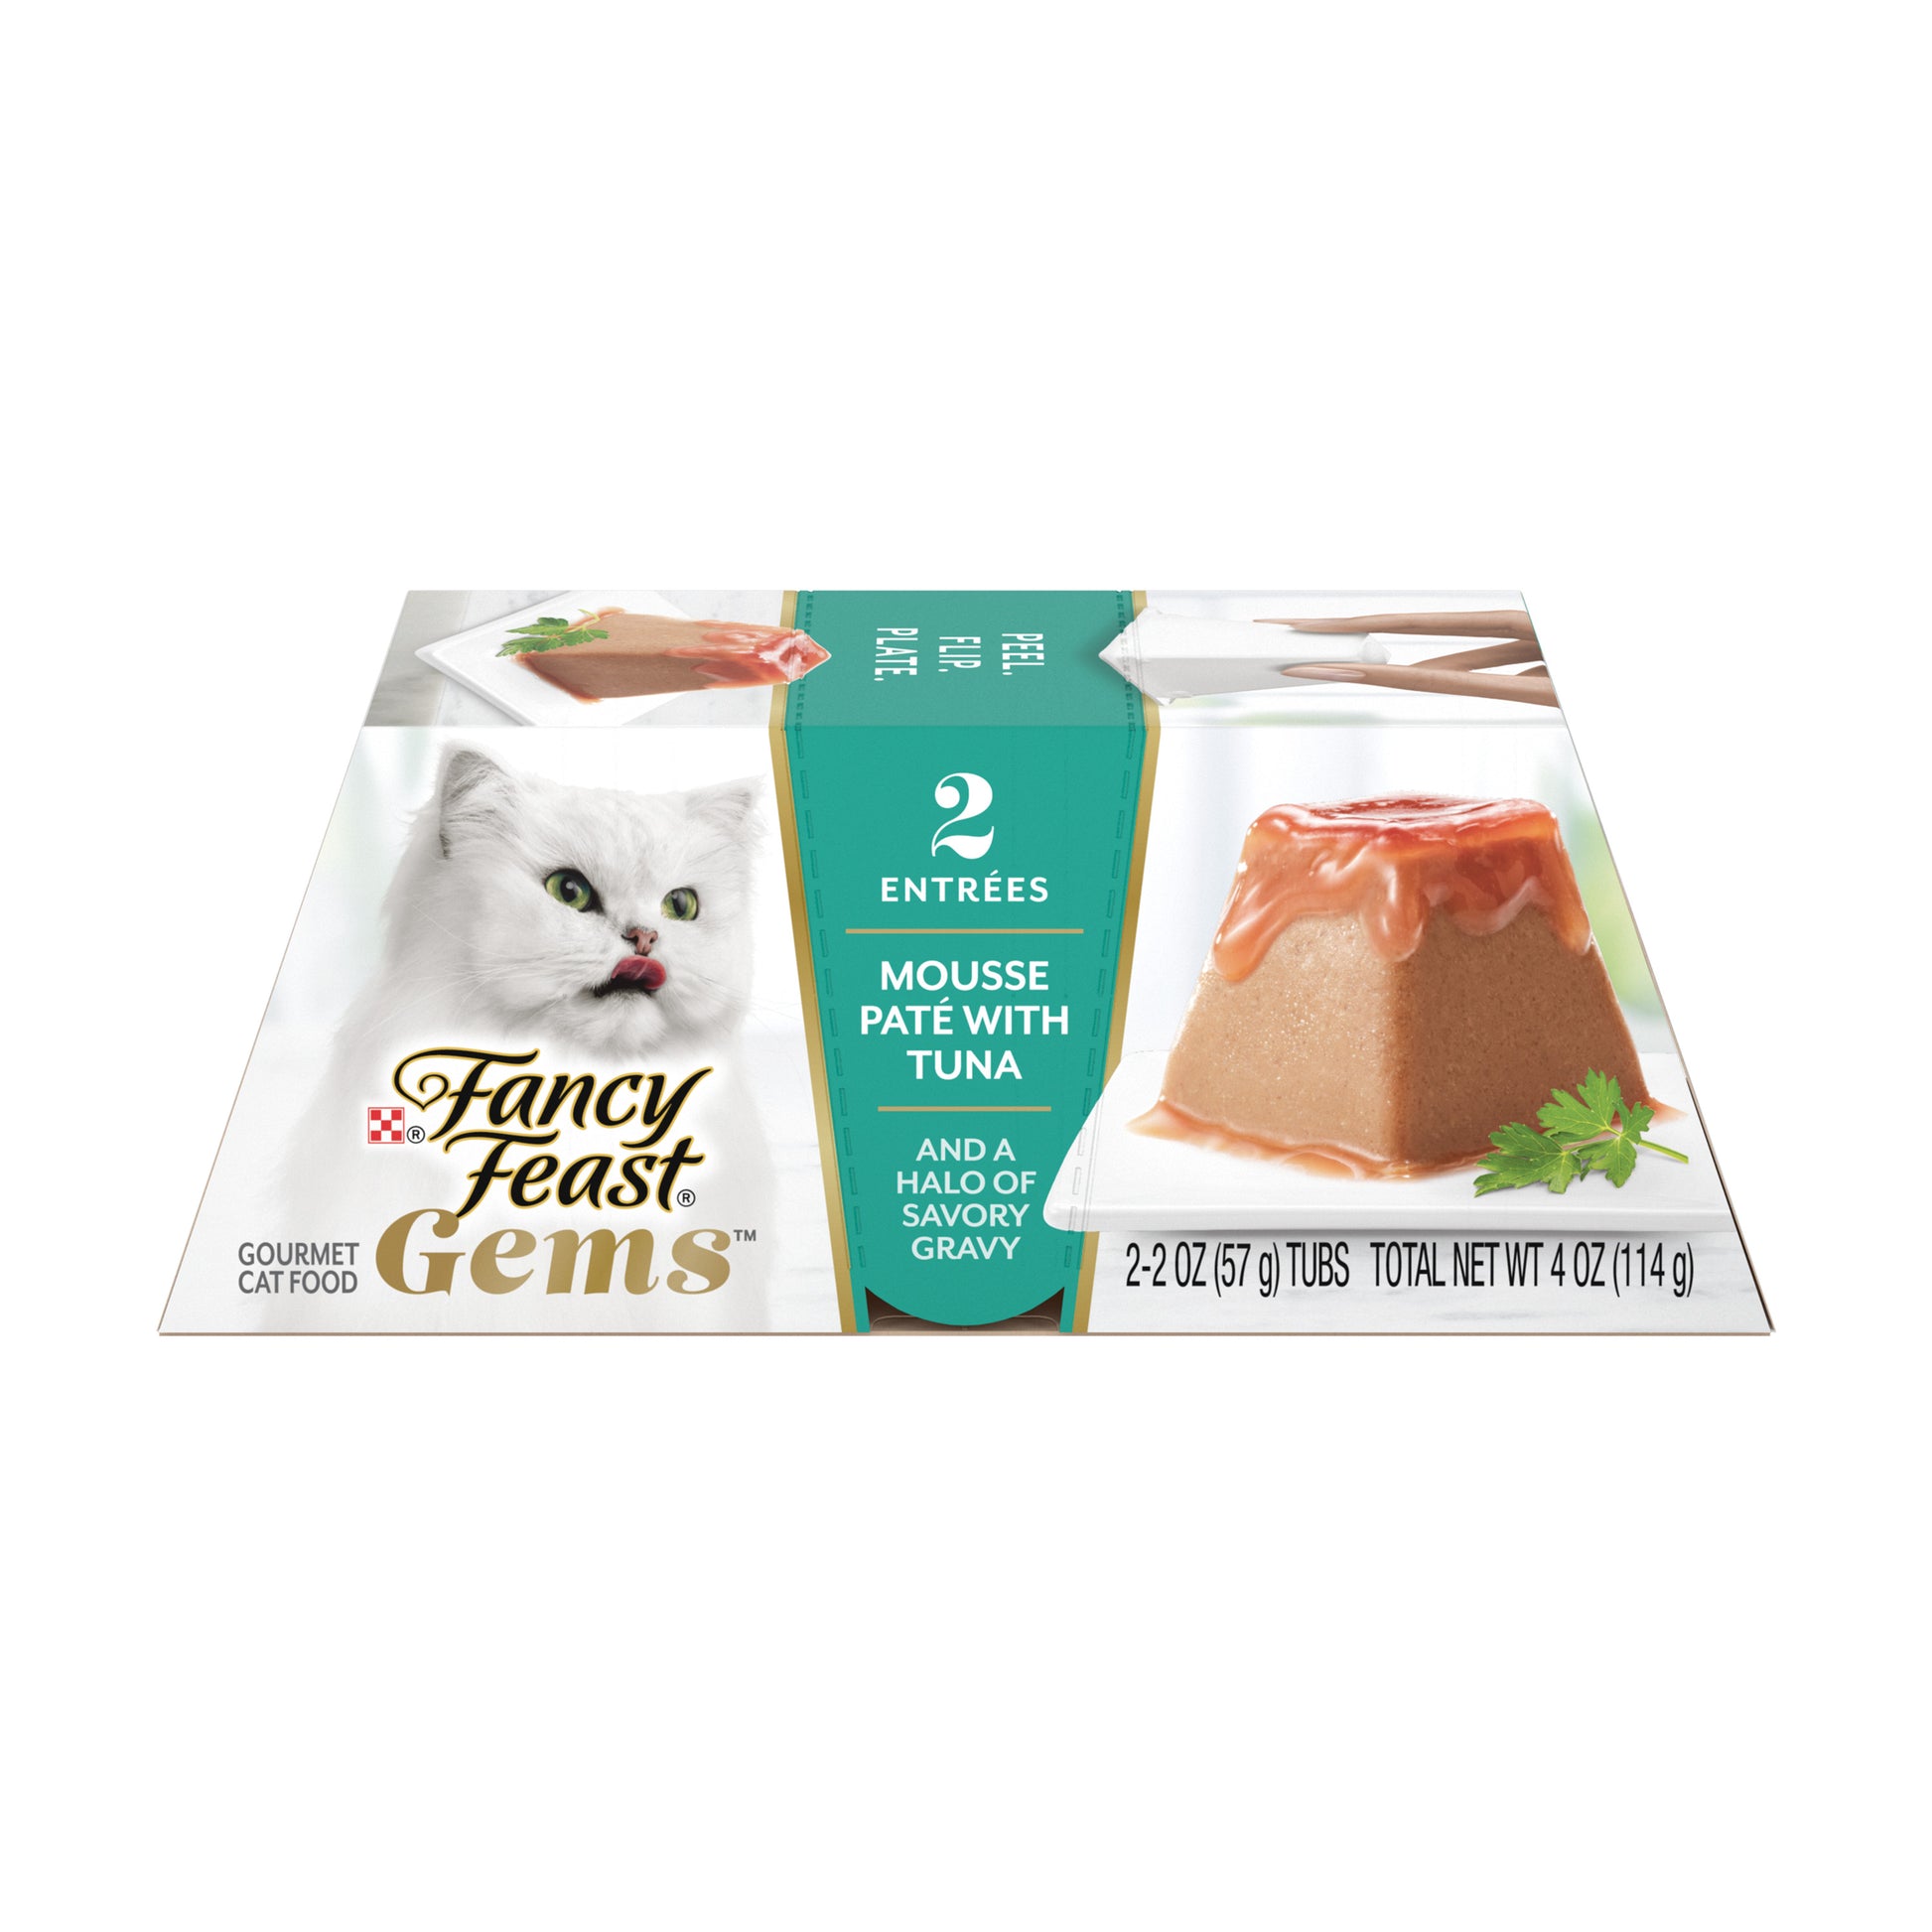 Dual pack of Gems Mousse Pate with tuna